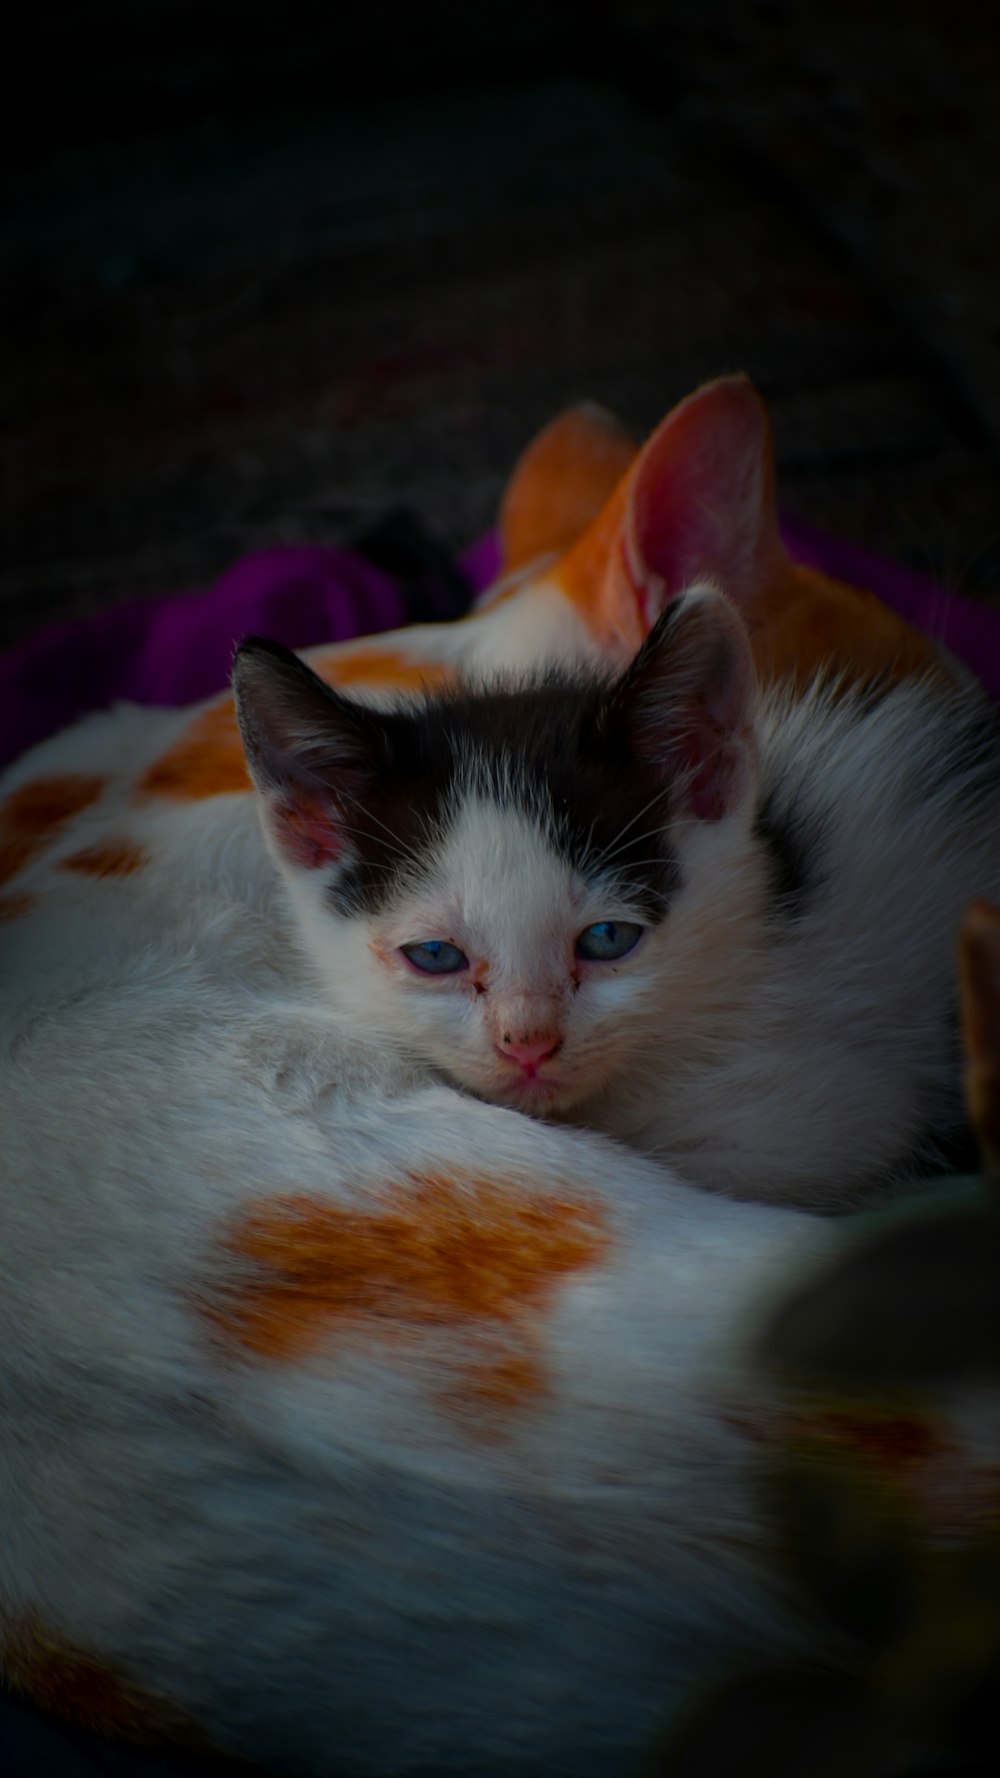 a black and white kitten with blue eyes curled up